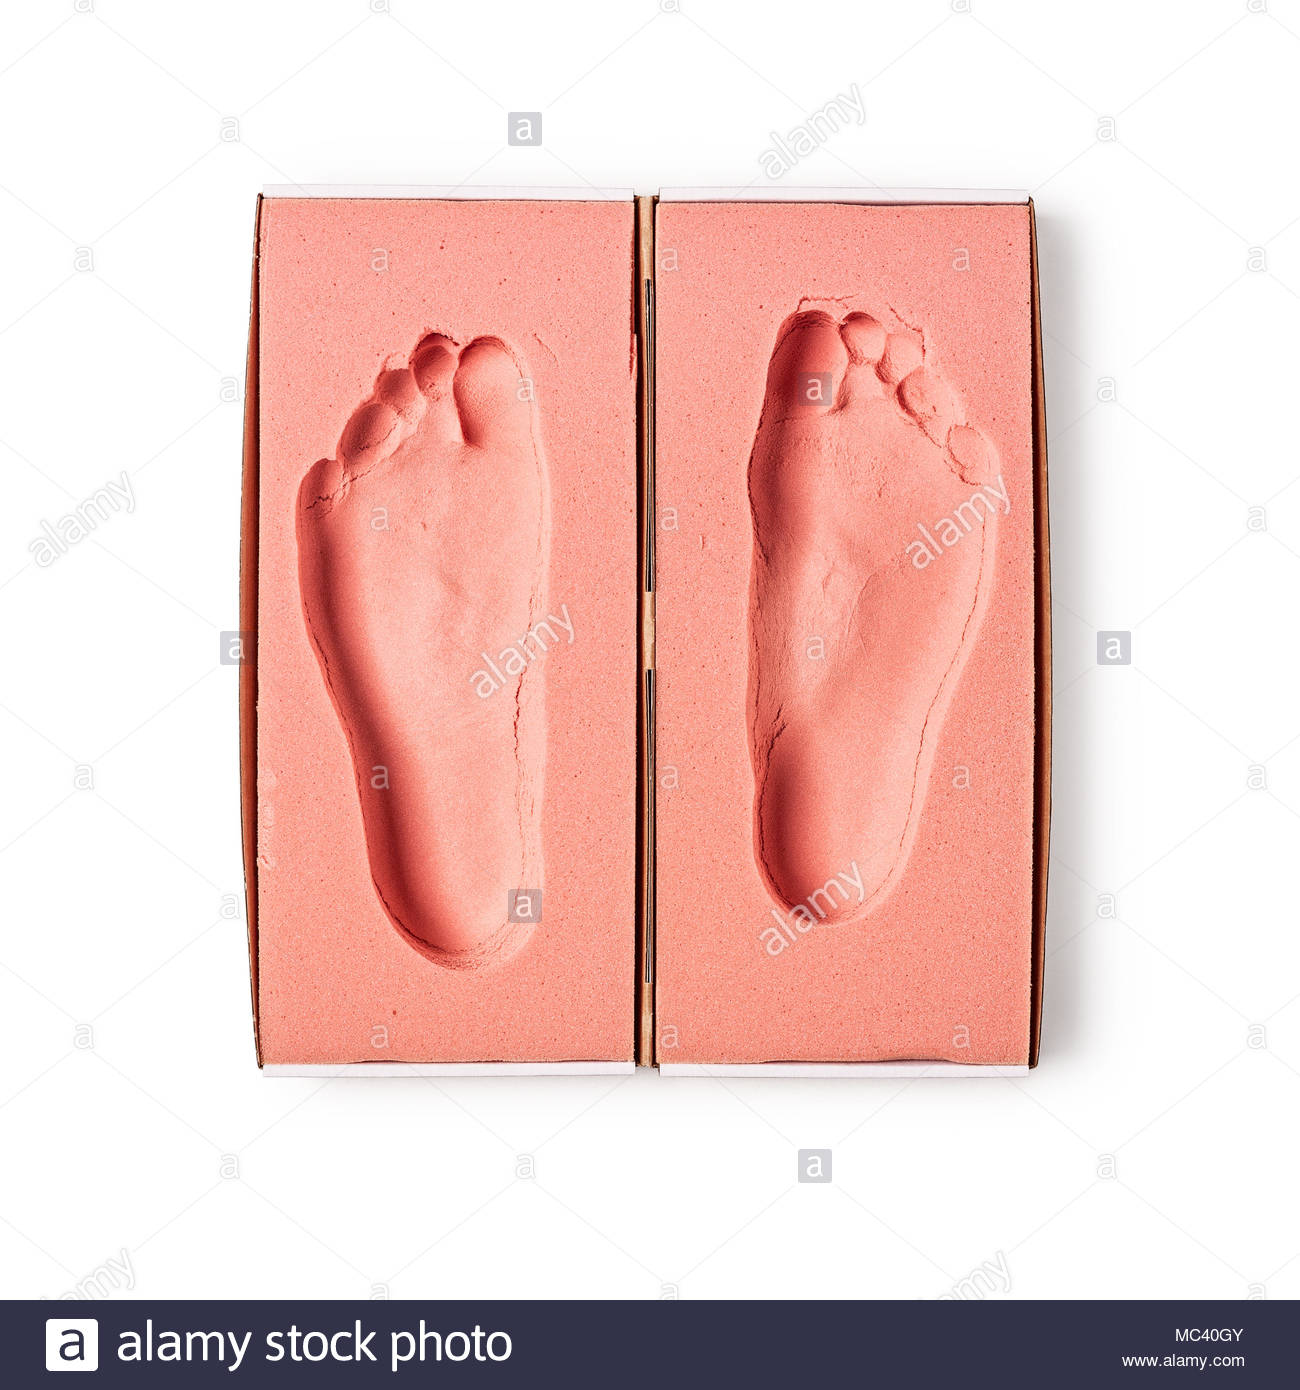 Orthopedic Footprint In Foam Block Isolated On White Background